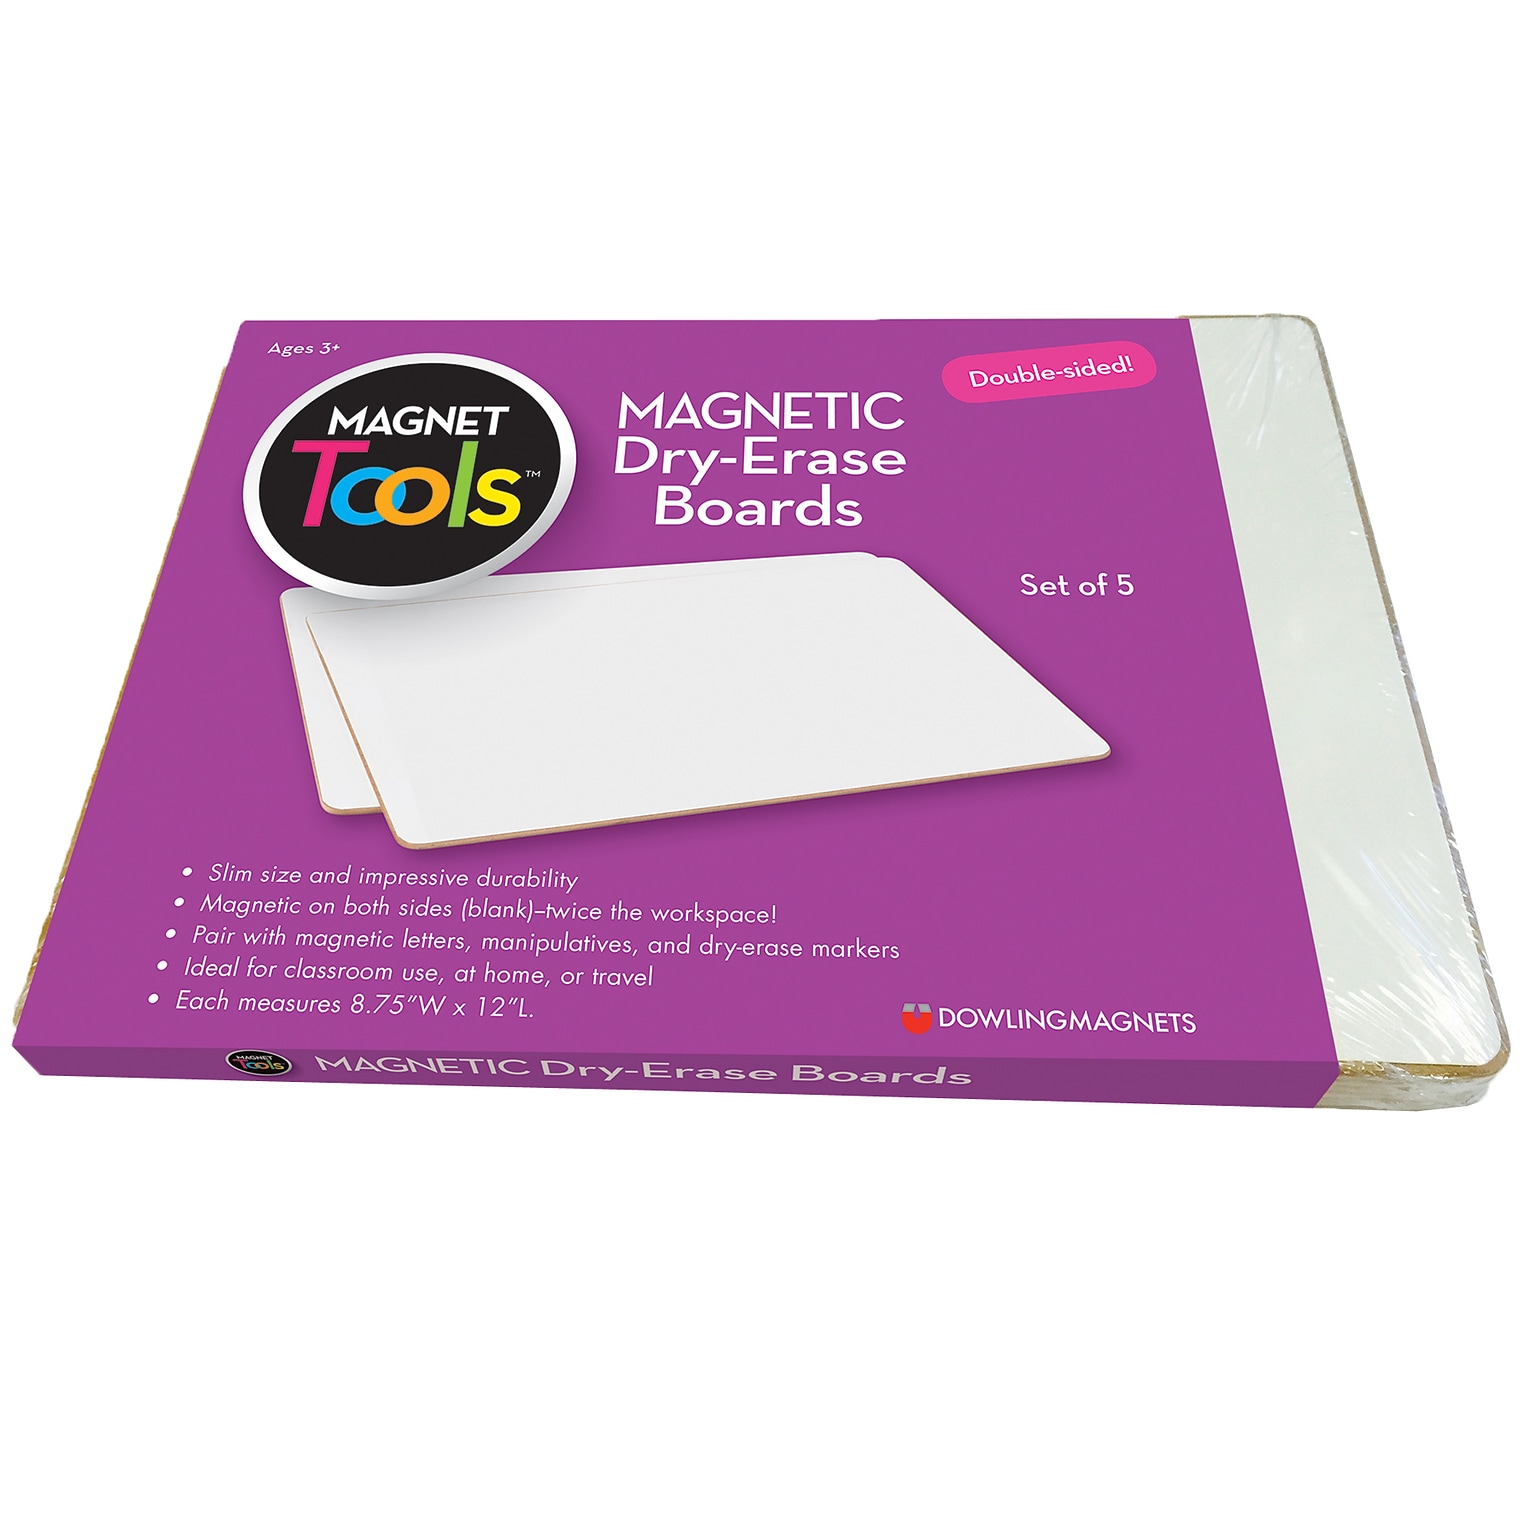 Dowling Magnets Magnet Tools Magnetic Dry-Erase Whiteboard, 9 x 12 (DO-735207)